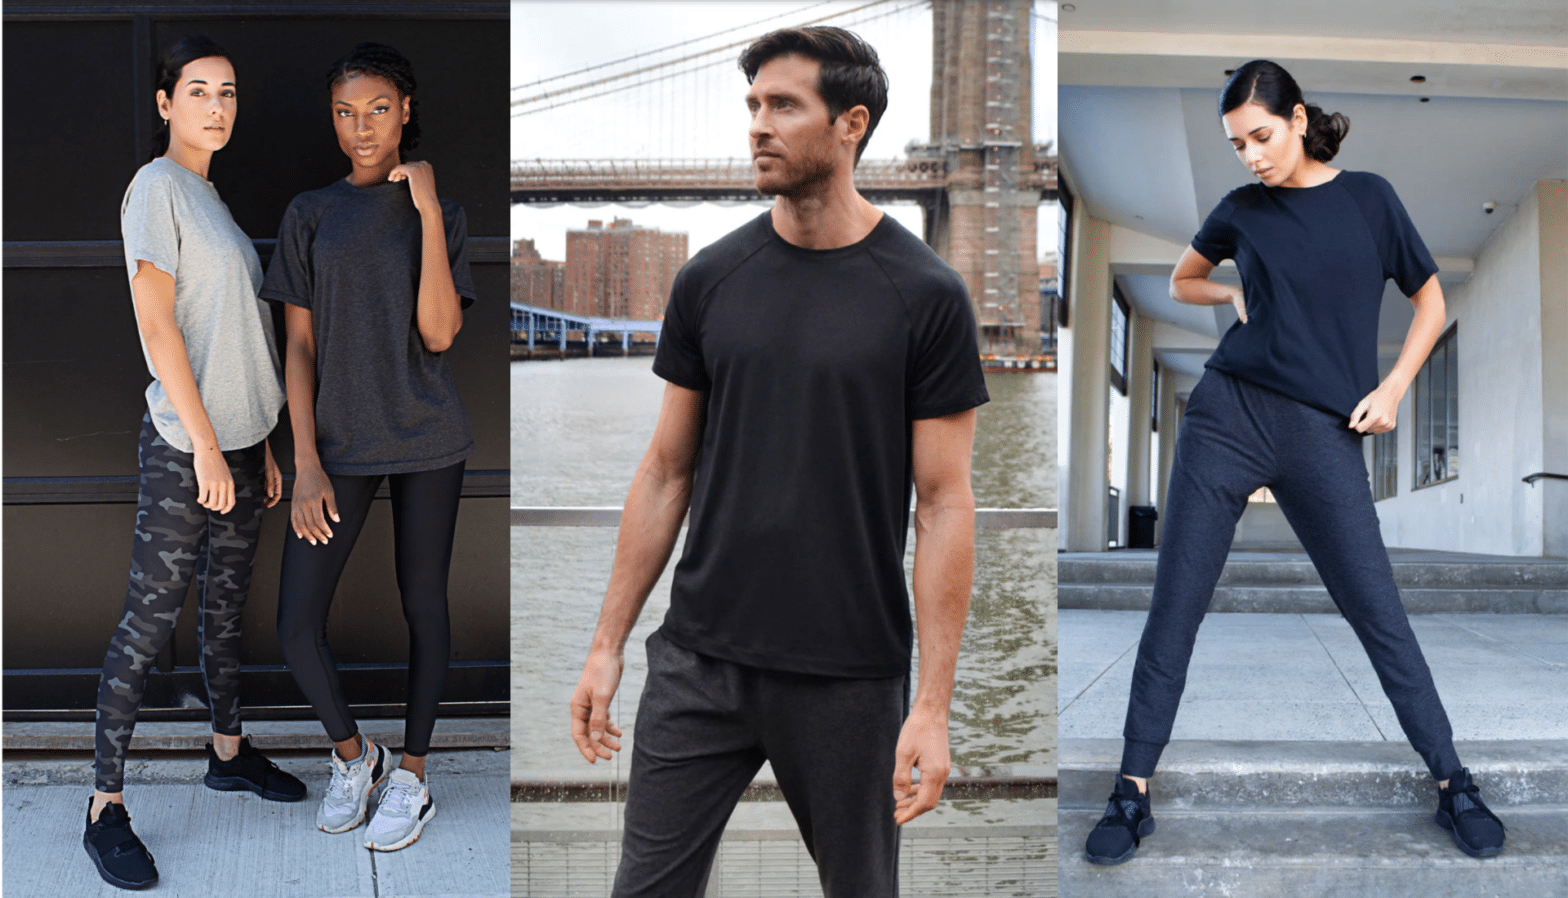 Athleisure: What Exactly Is This New Fashion Trend and Why Is it